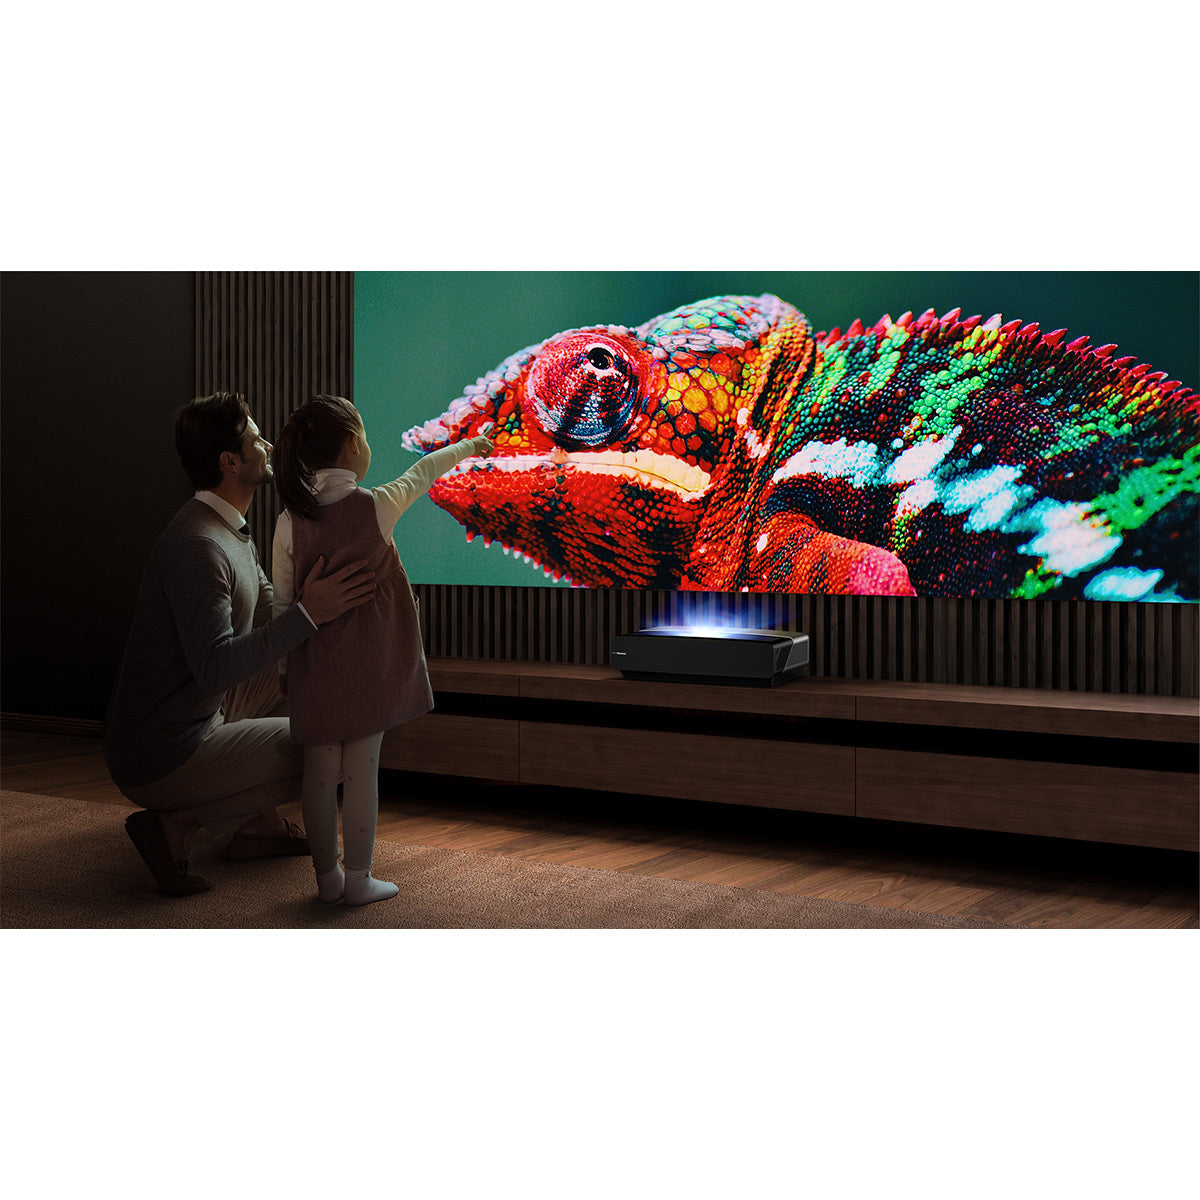 Hisense L5G 4K UHD Ultra-Short Throw Laser TV Projector with 120" High Gain Ambient Light Rejecting Screen Compatible with Dolby Atmos, Google Assistant, Alexa, & Chromecast Built-in